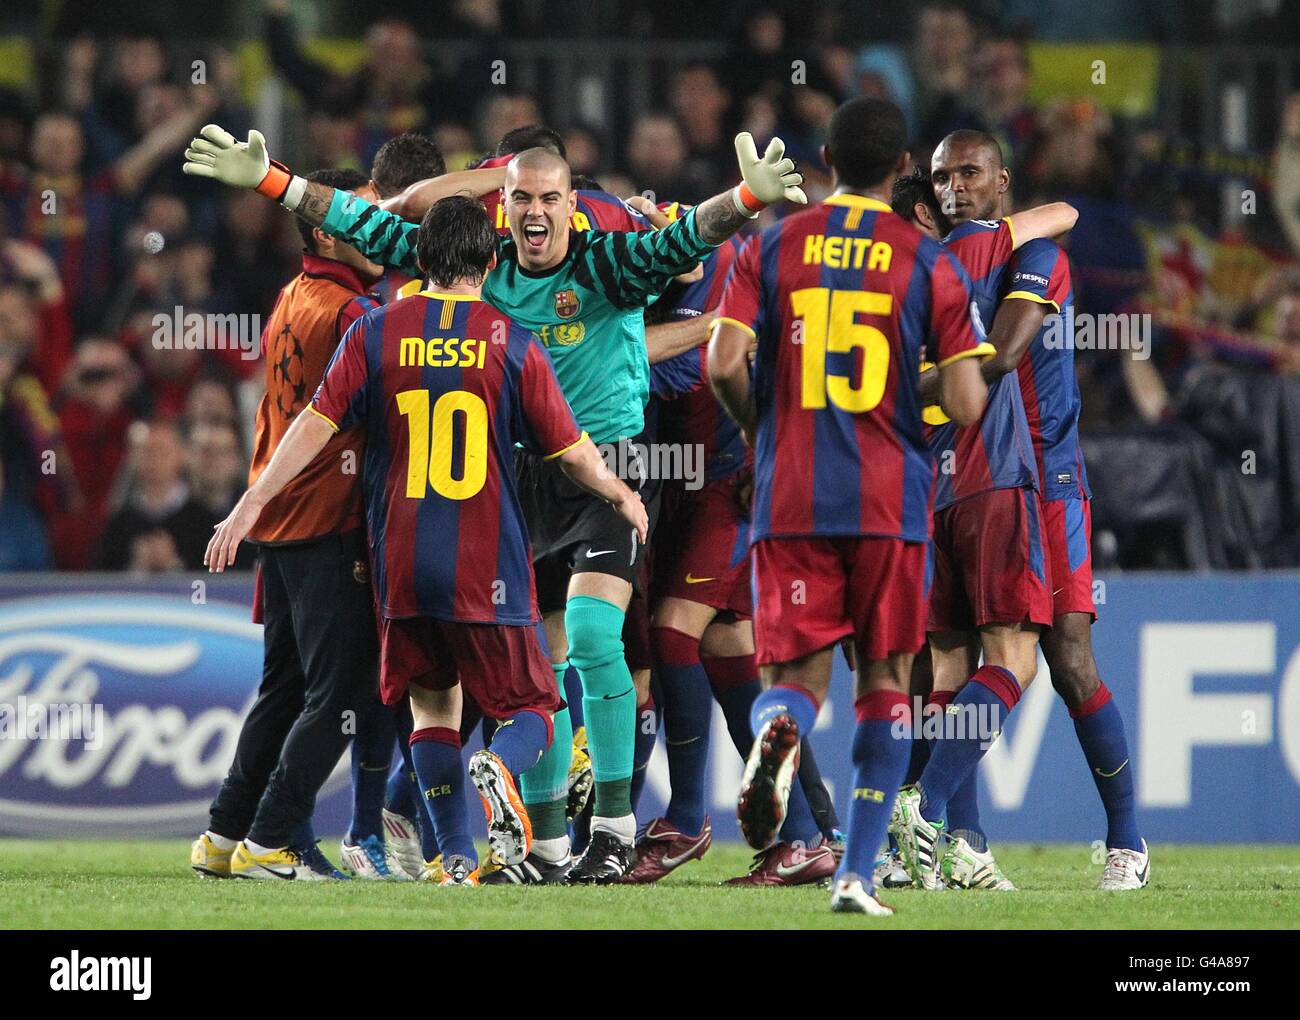 Soccer - UEFA Champions League - Semi Final - Second Leg - Barcelona v Real Madrid - Nou Camp. Barcelona goalkeeper Victor Valdes (centre) celebrates with team-mate Lionel Messi after the final whistle Stock Photo